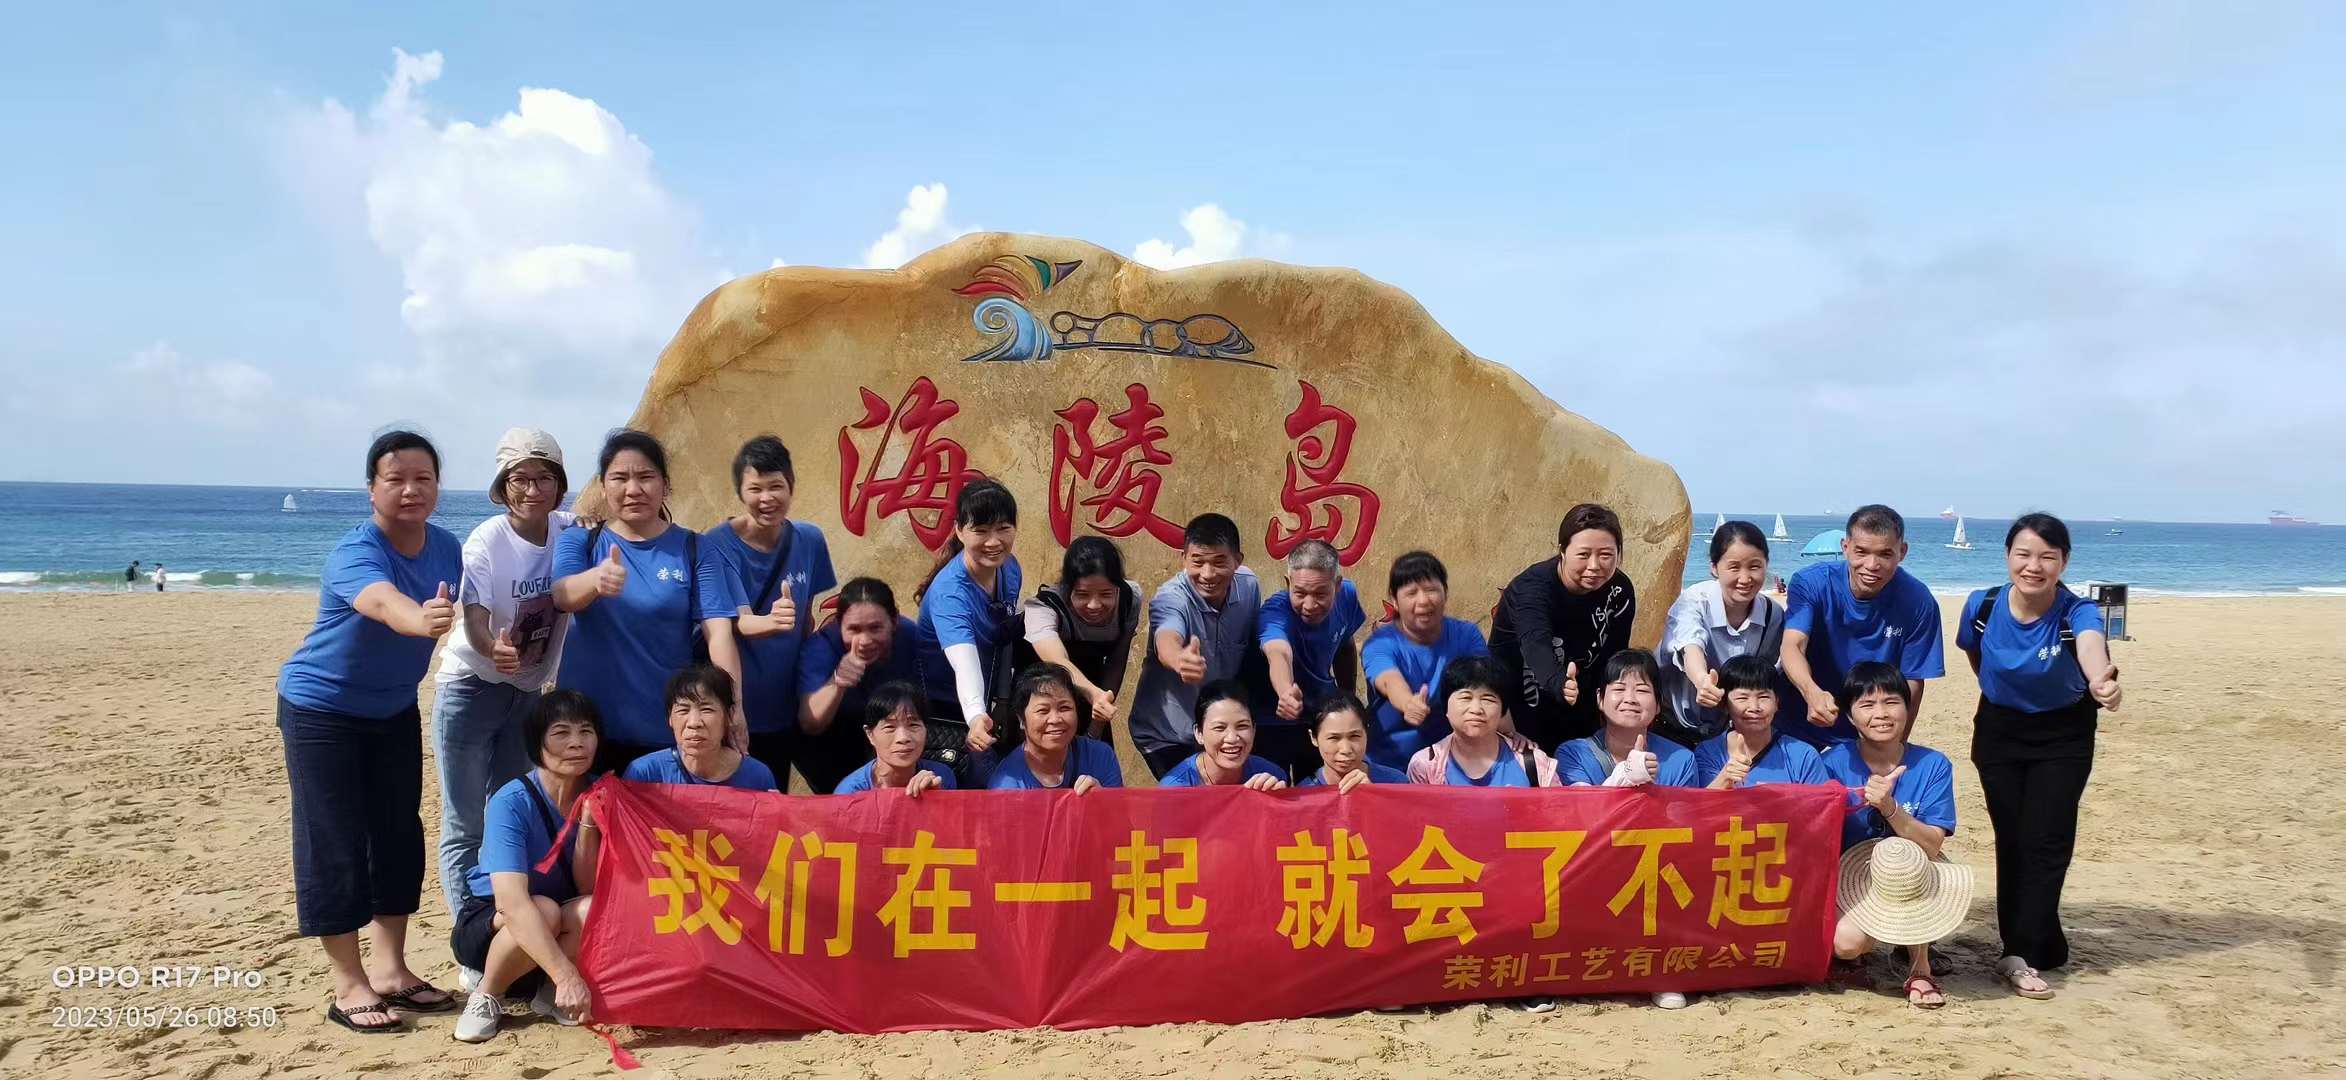 <strong>Outdoor Activities in Yangjiang</strong>